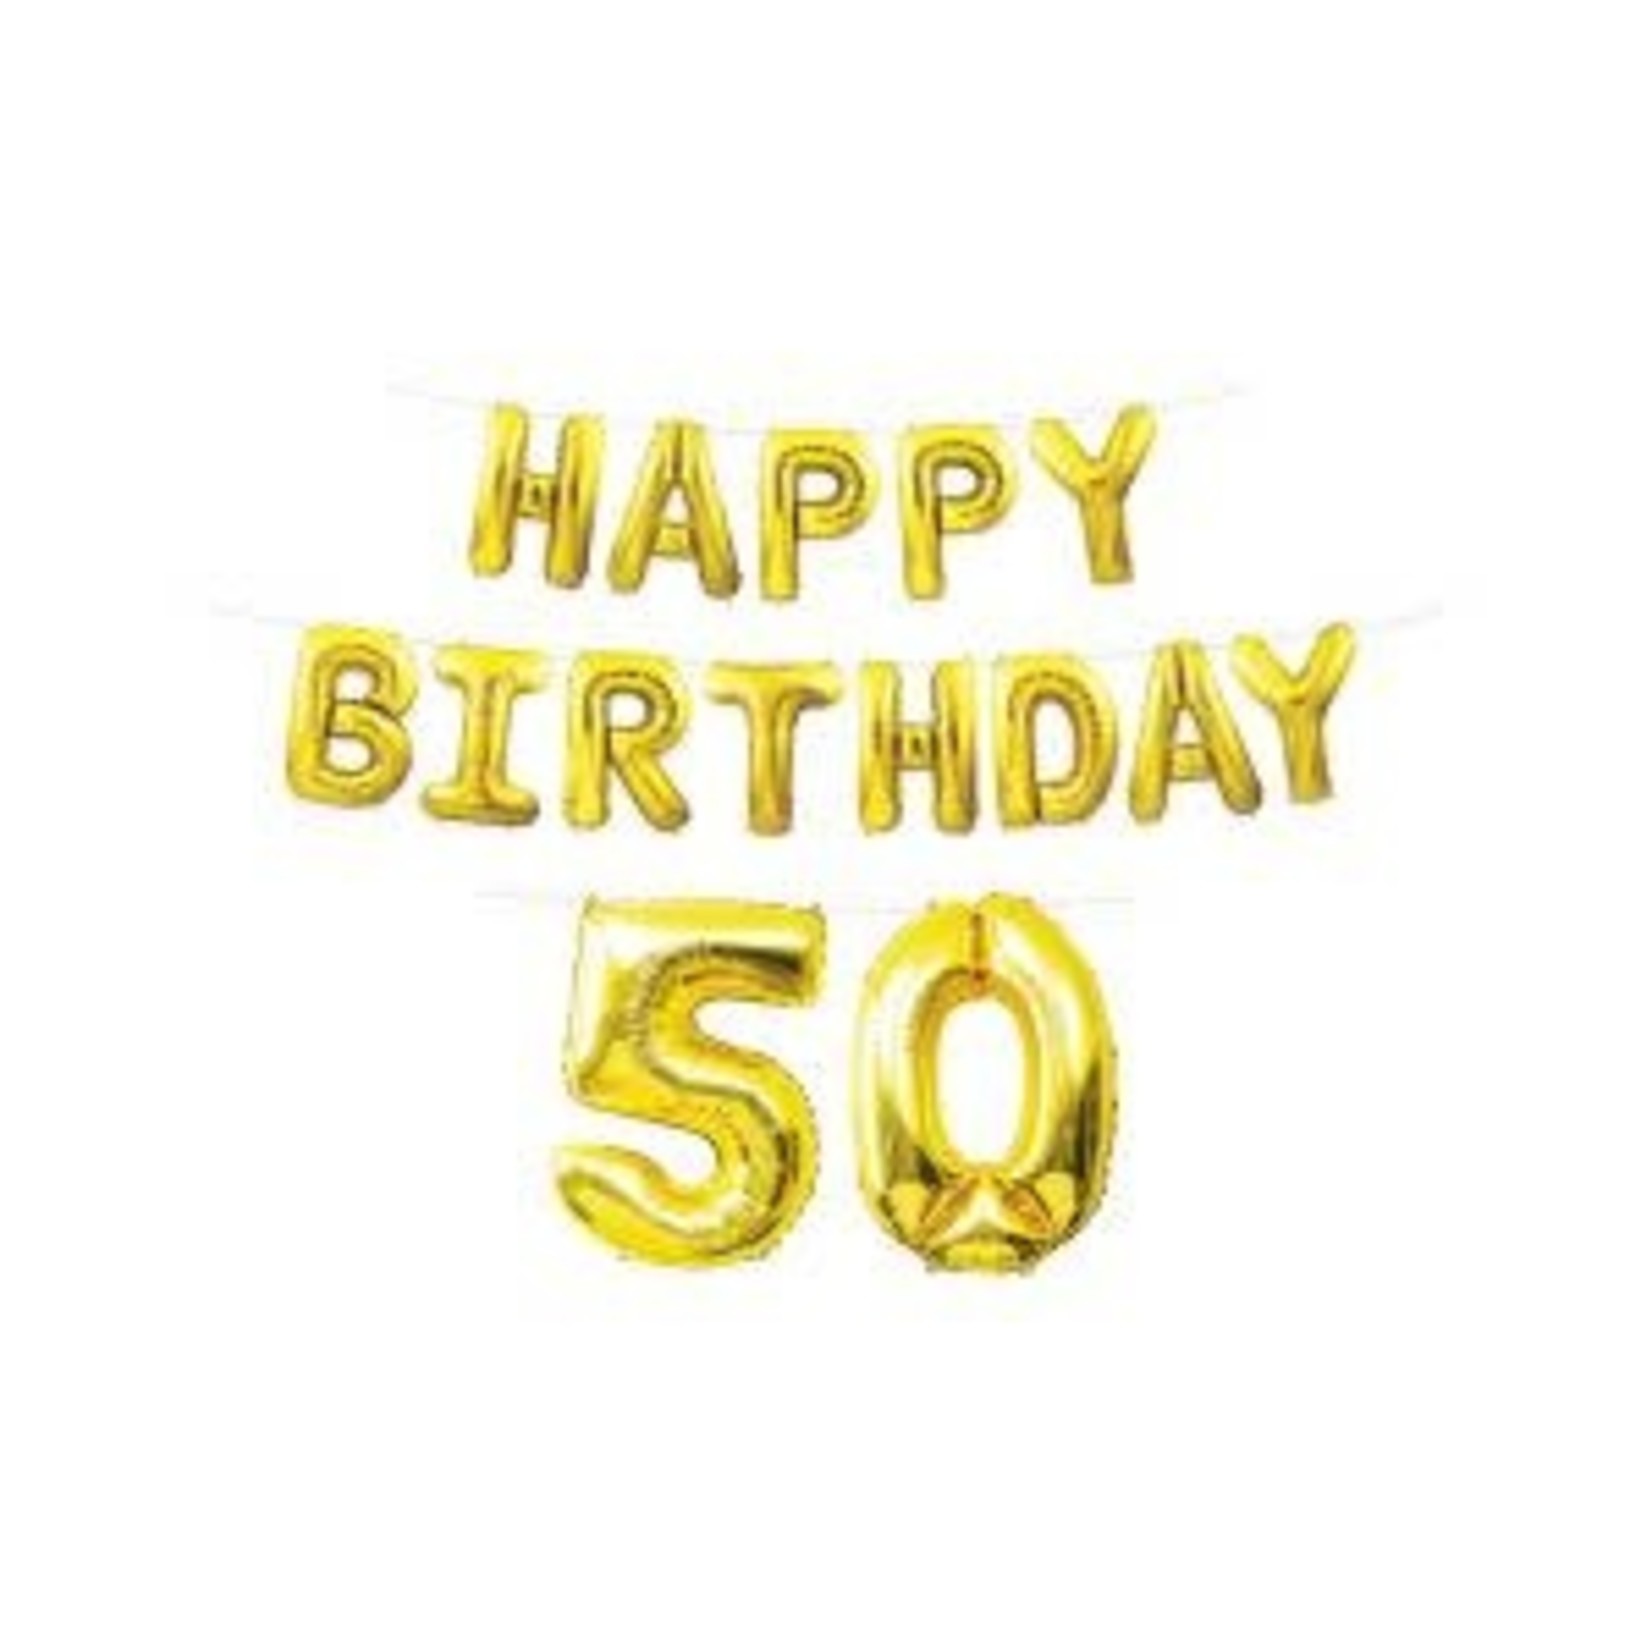 Beistle Gold Happy 50th Birthday Air-Filled Letter Balloon Banner - 15ft.